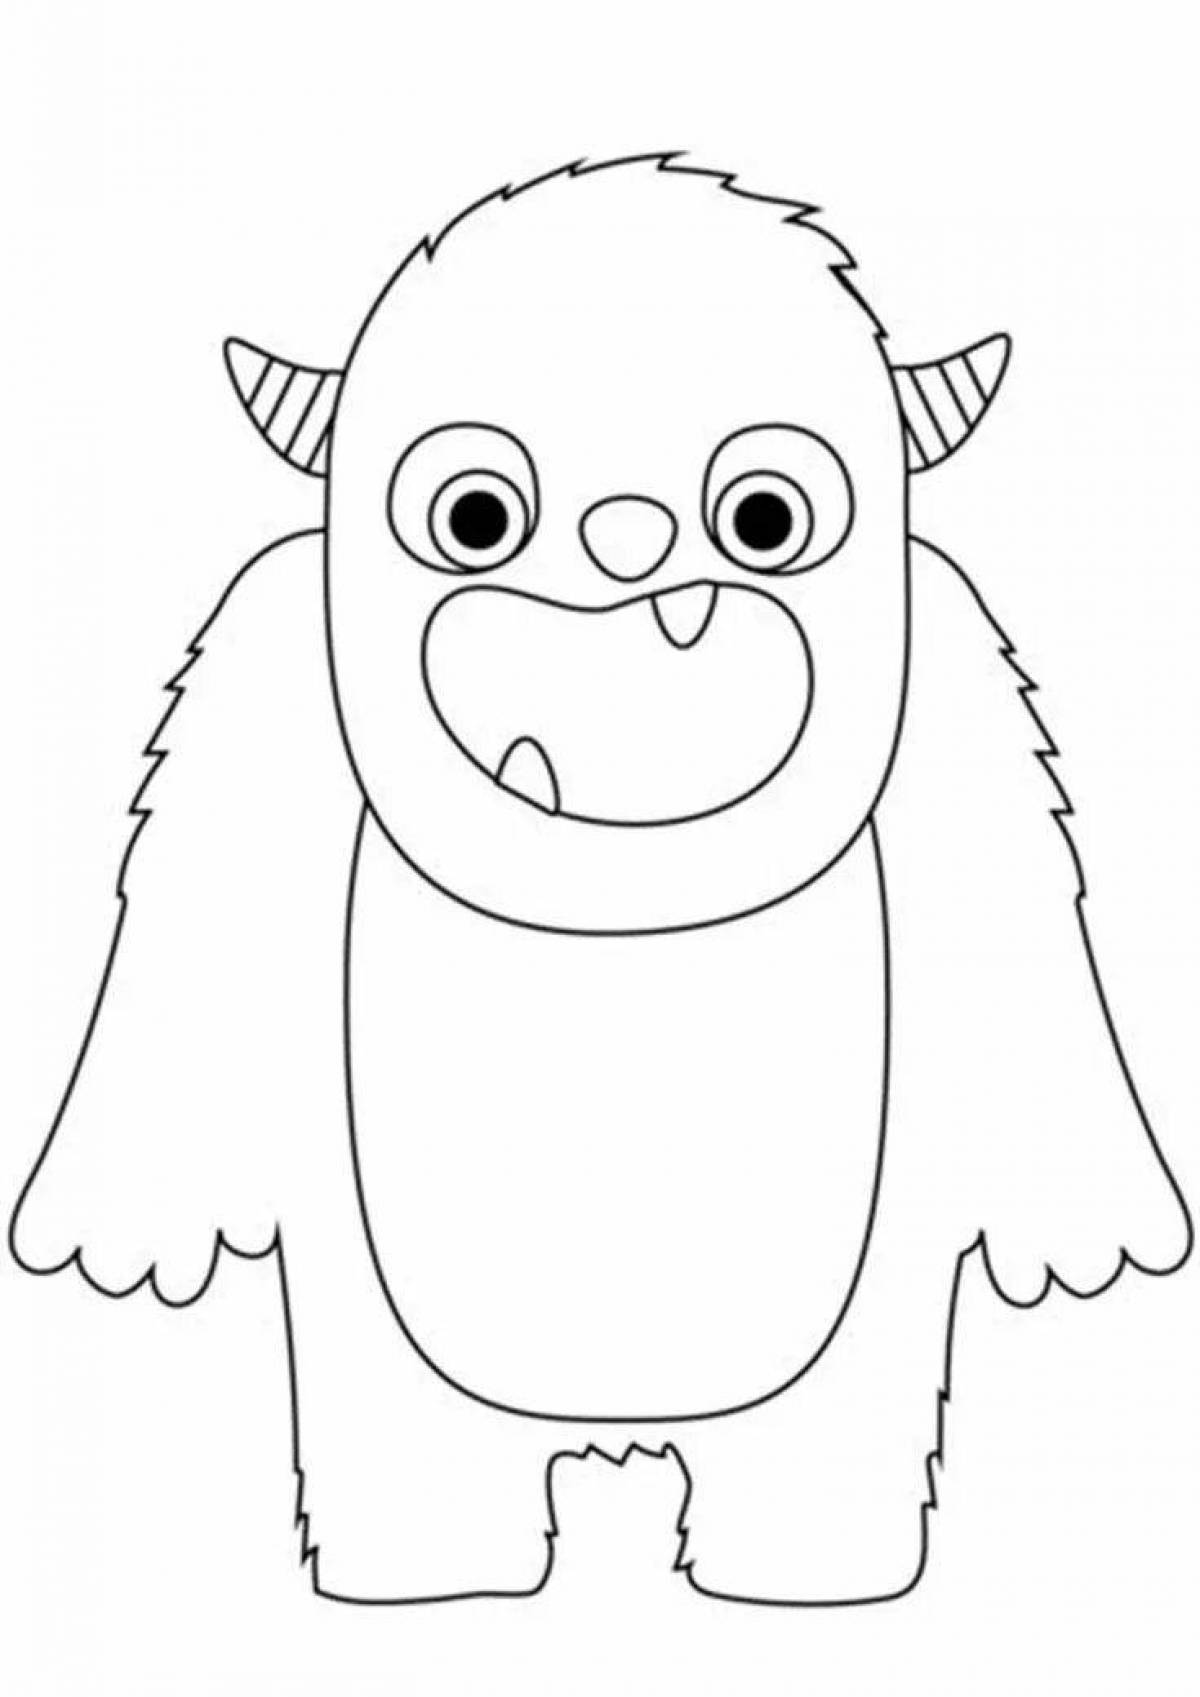 Adorable monsters coloring pages for kids